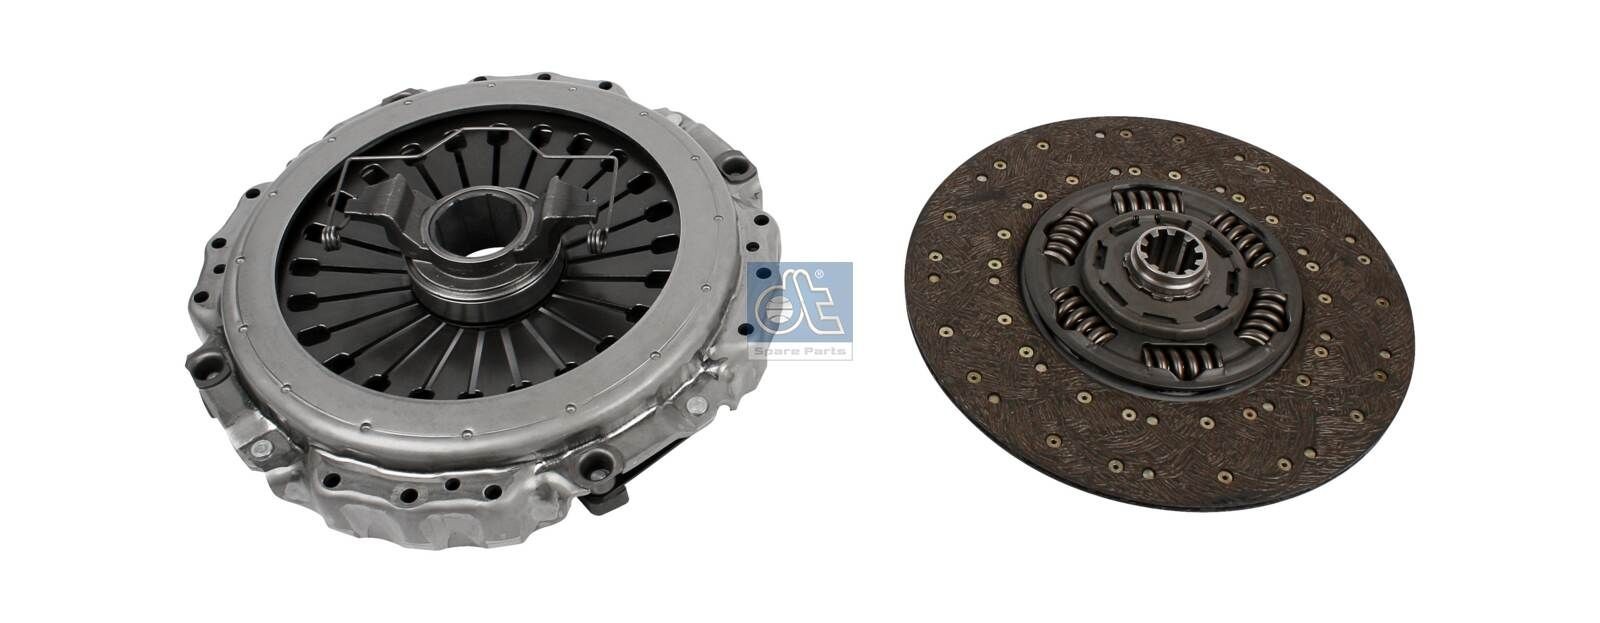 3400 043 032 DT Spare Parts 430mm Ø: 430mm Clutch replacement kit 2.93033 buy